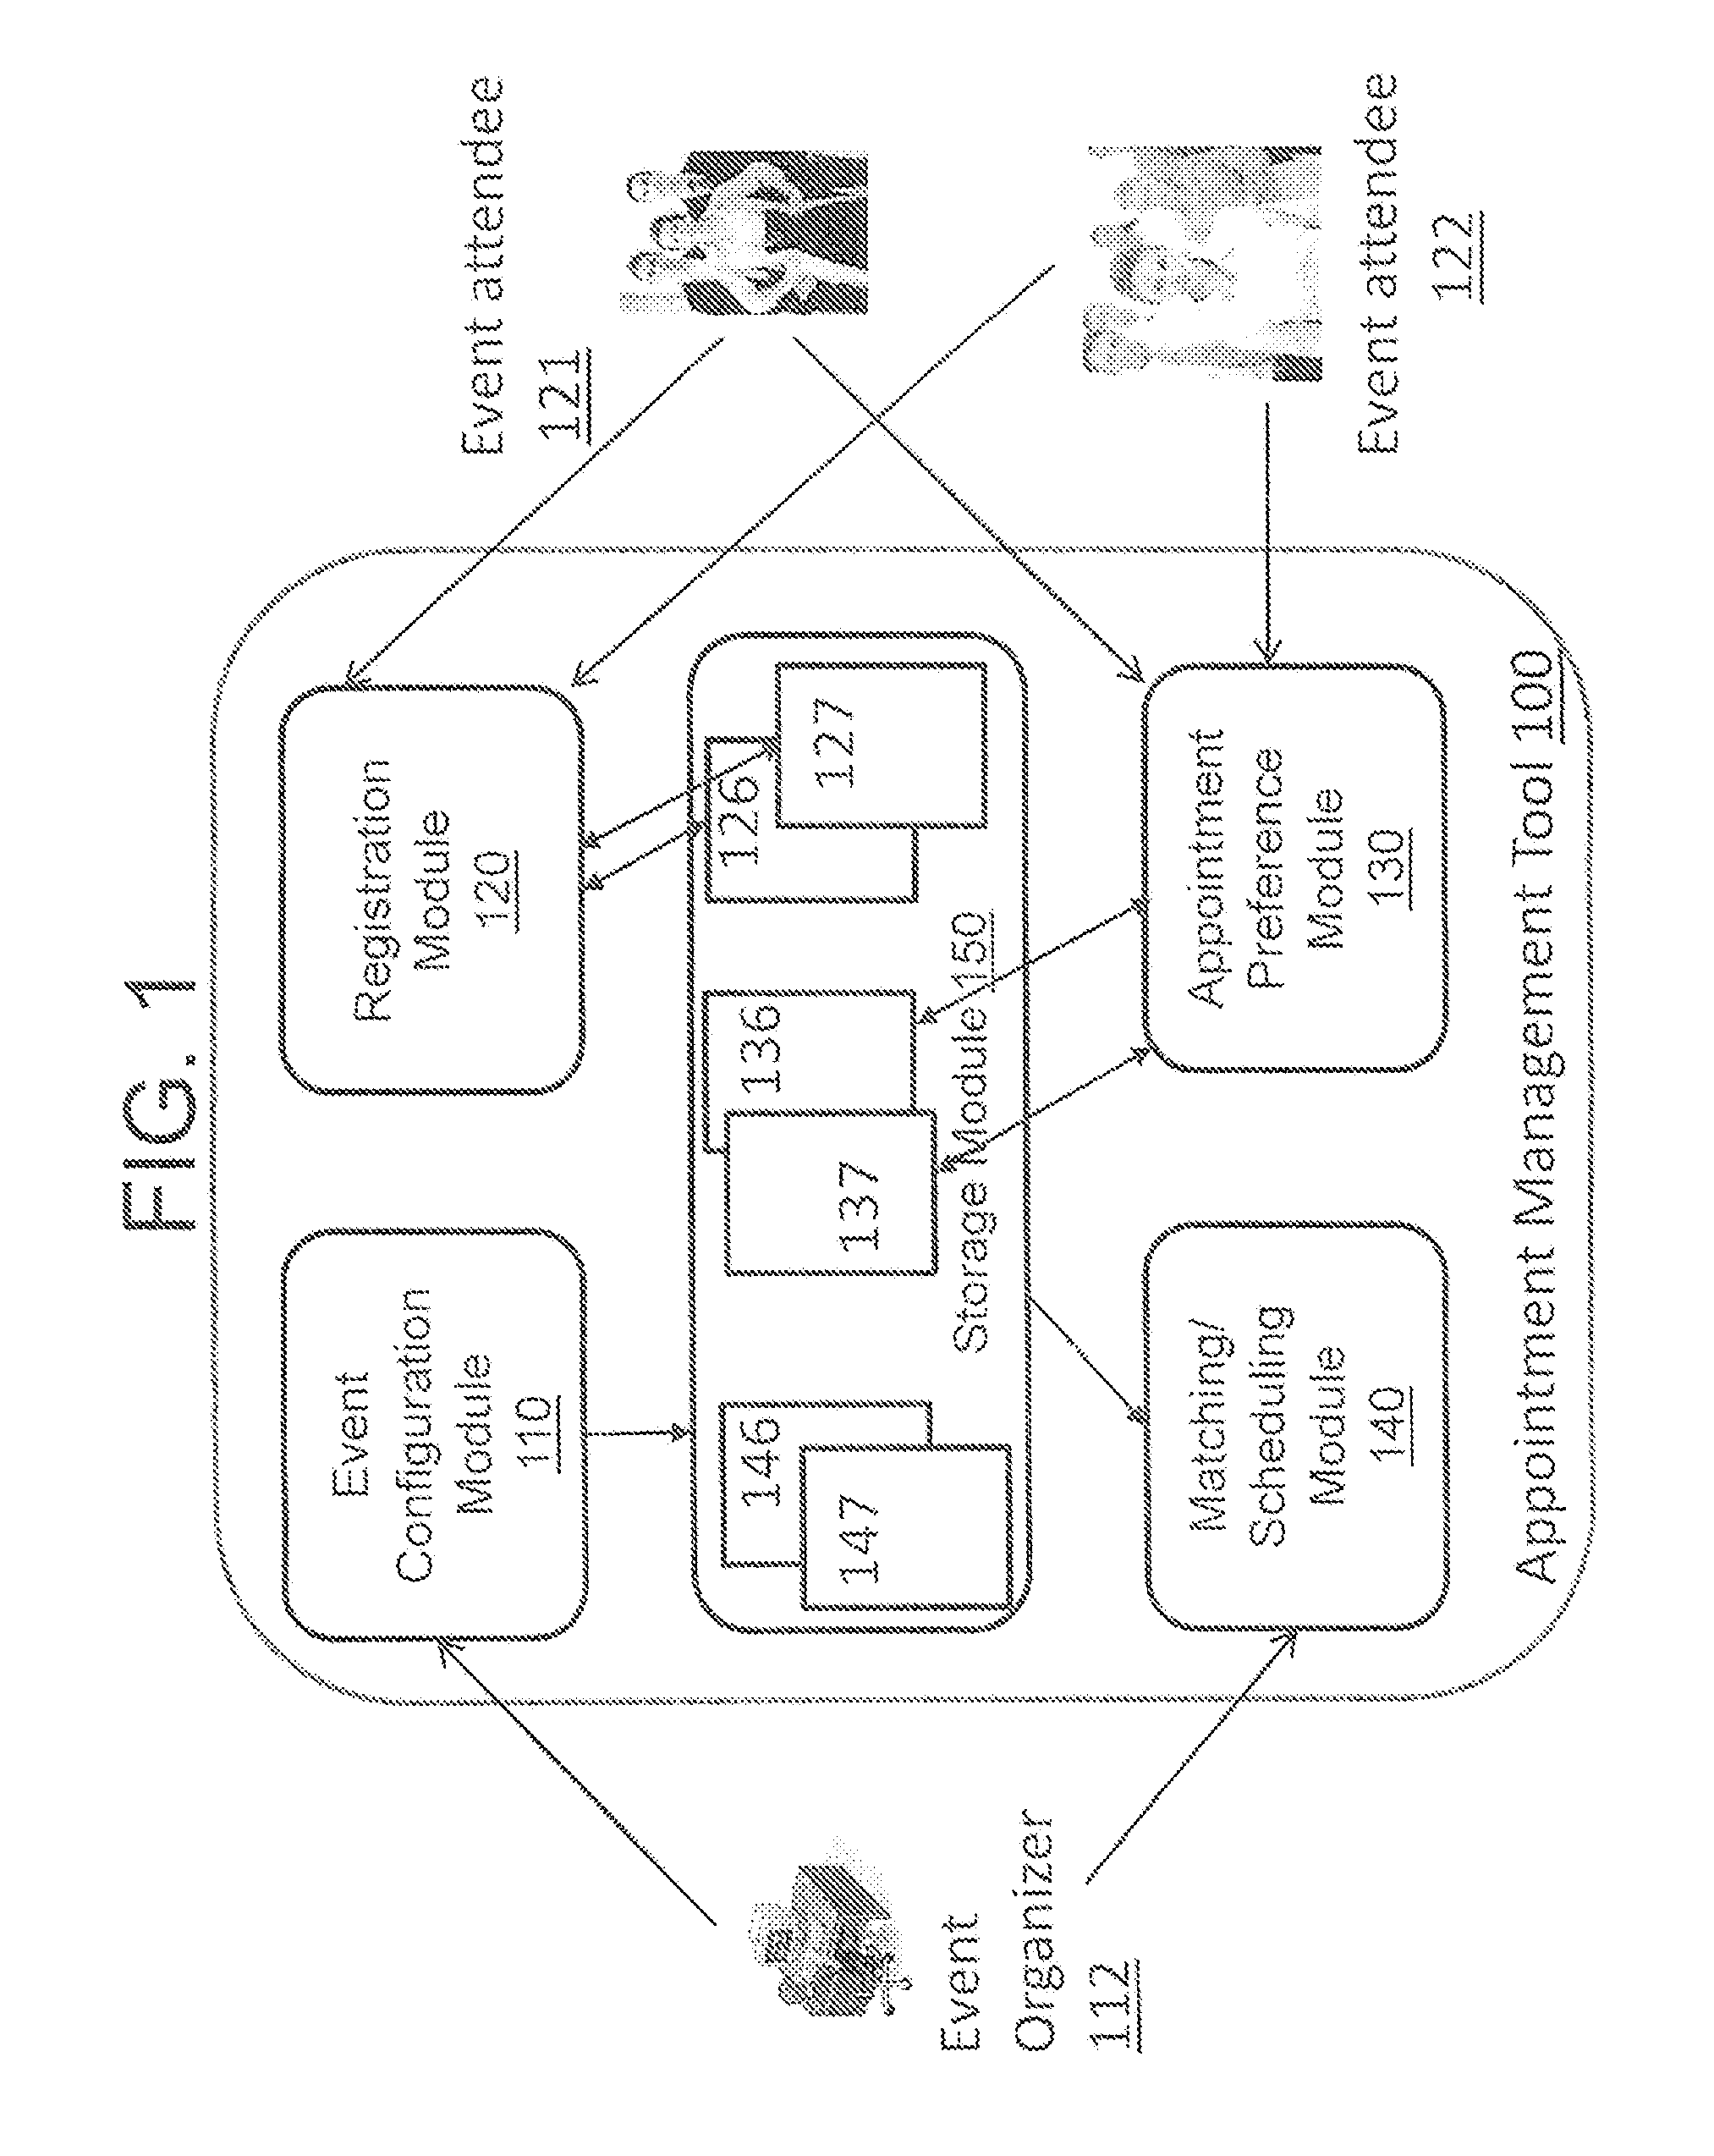 Method and apparatus for appointment matching and scheduling in event management